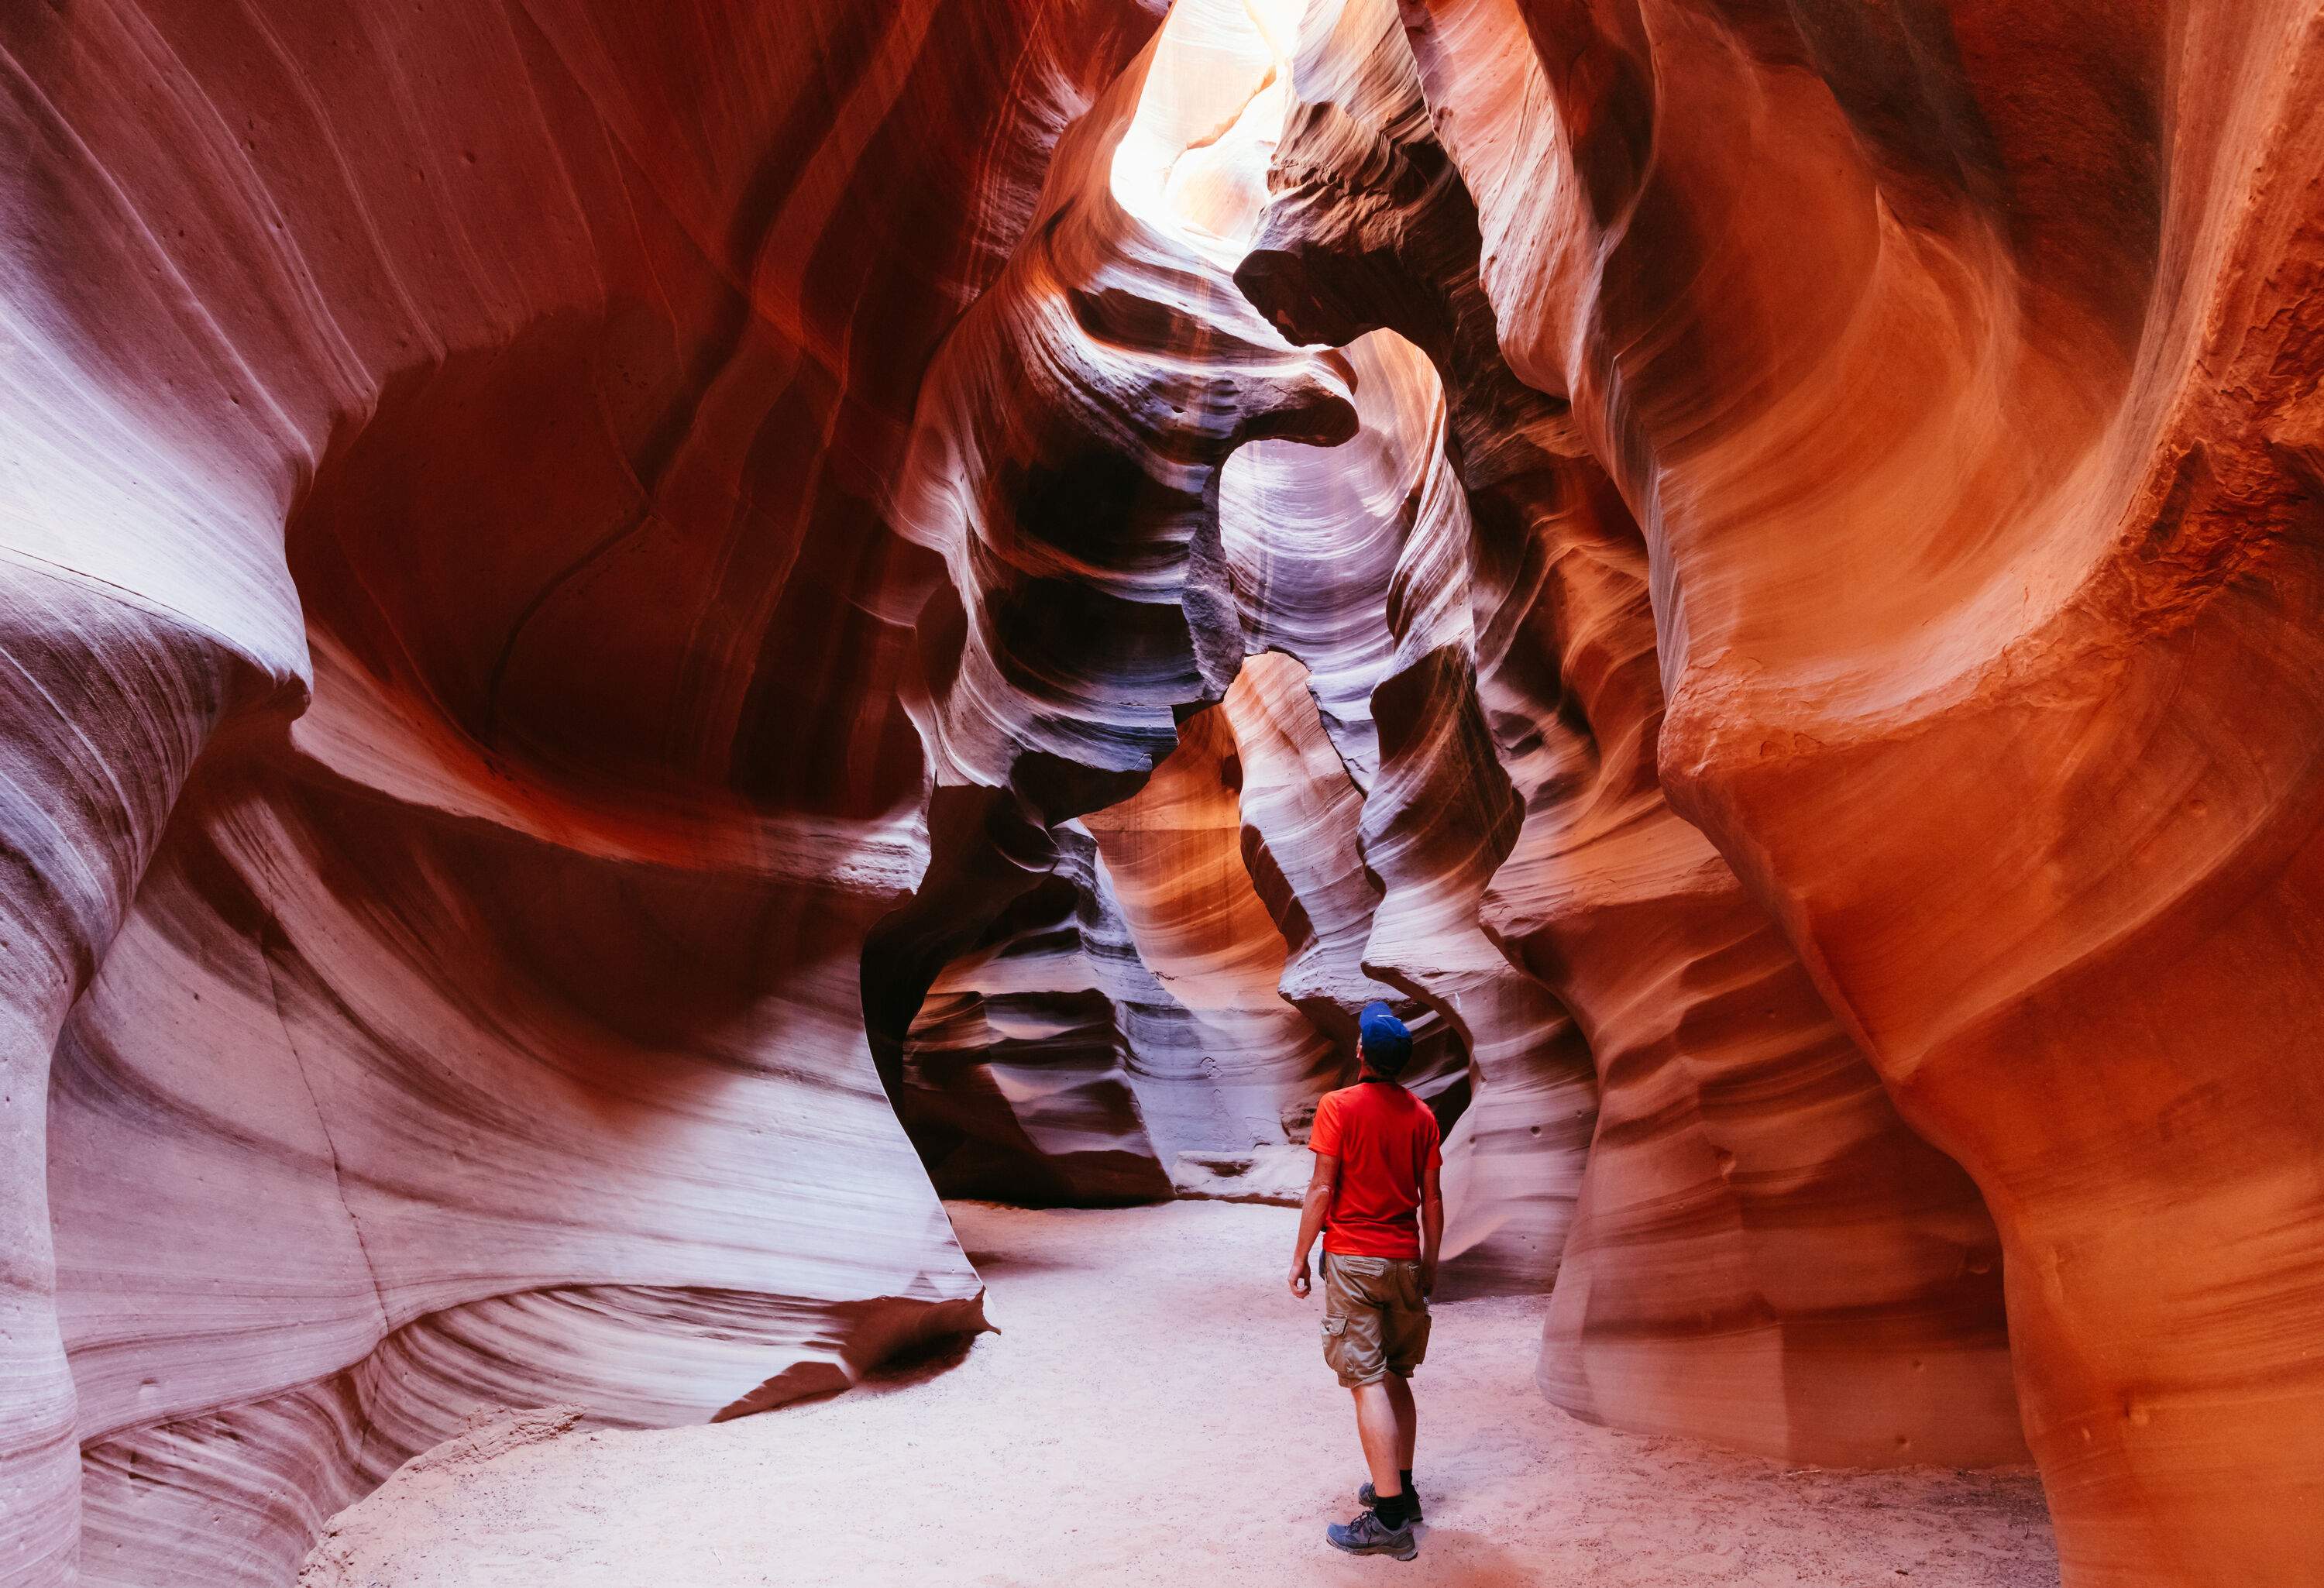 A person stands inside Antelope Canyon, gazing upward through a natural opening in the sandstone formations, immersed in a surreal world of textured beauty and the play of light.